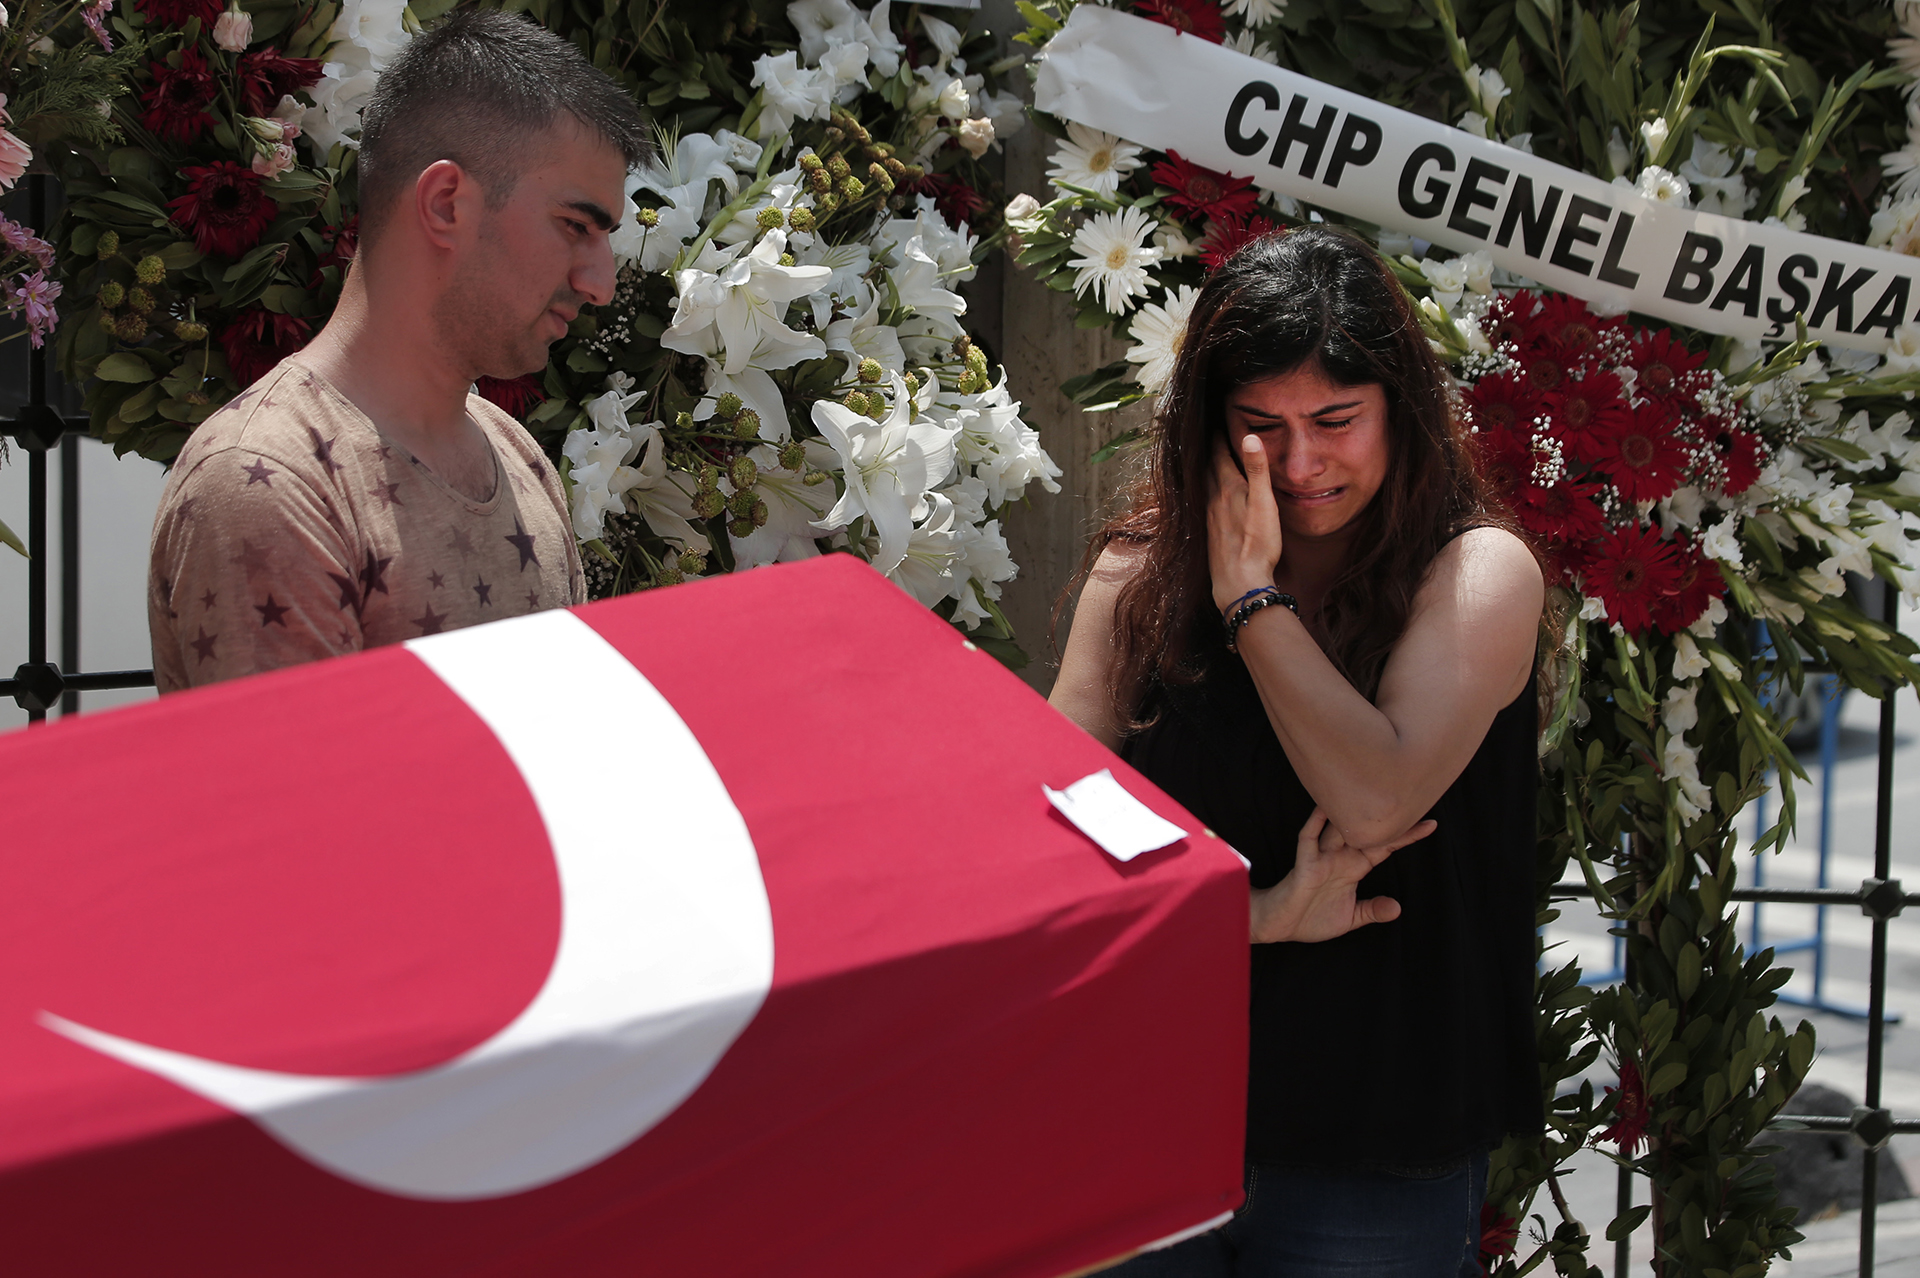 Turkish authorities identify suicide bombers; death toll 44